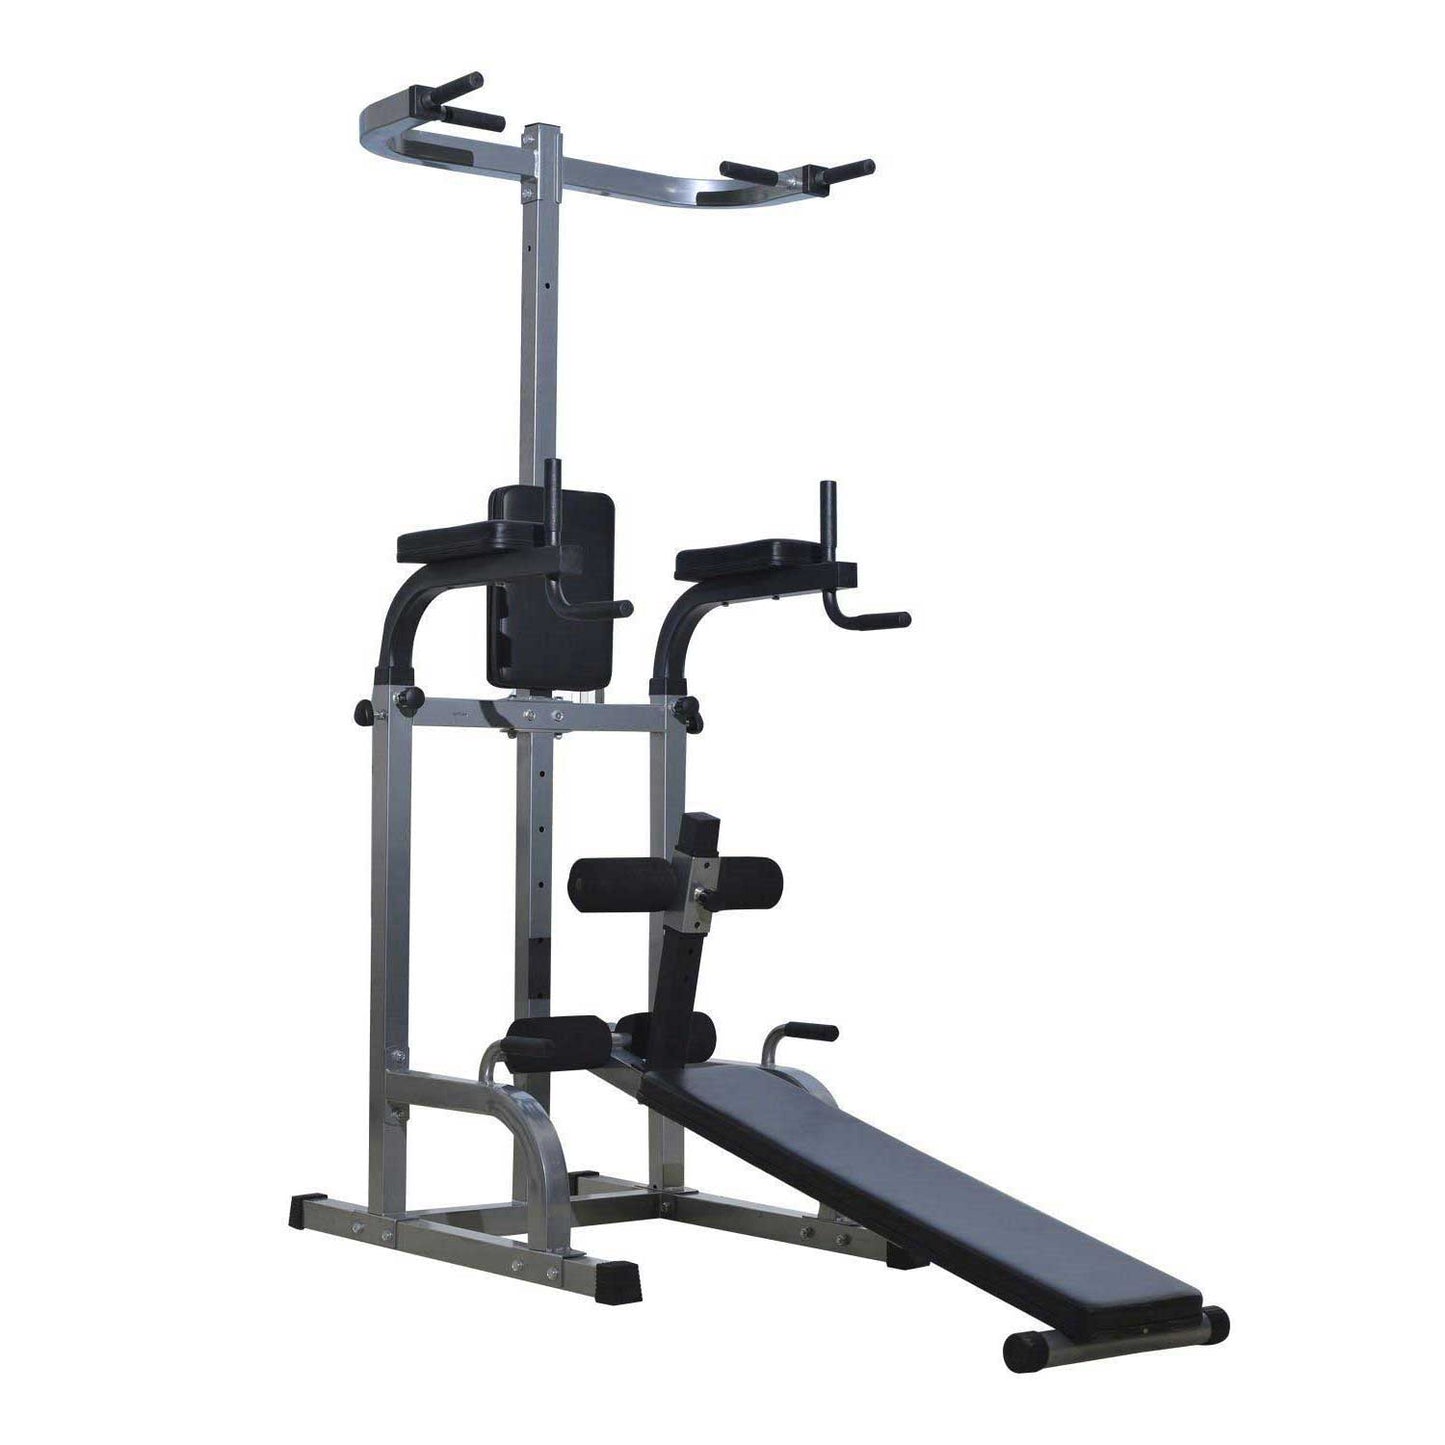 Multi-function Power Tower with Dip Station, Sit-up Bench, Pullup Bar, Push up Station, Combo Exercise Home Gym Fitness Equipment at Gallery Canada